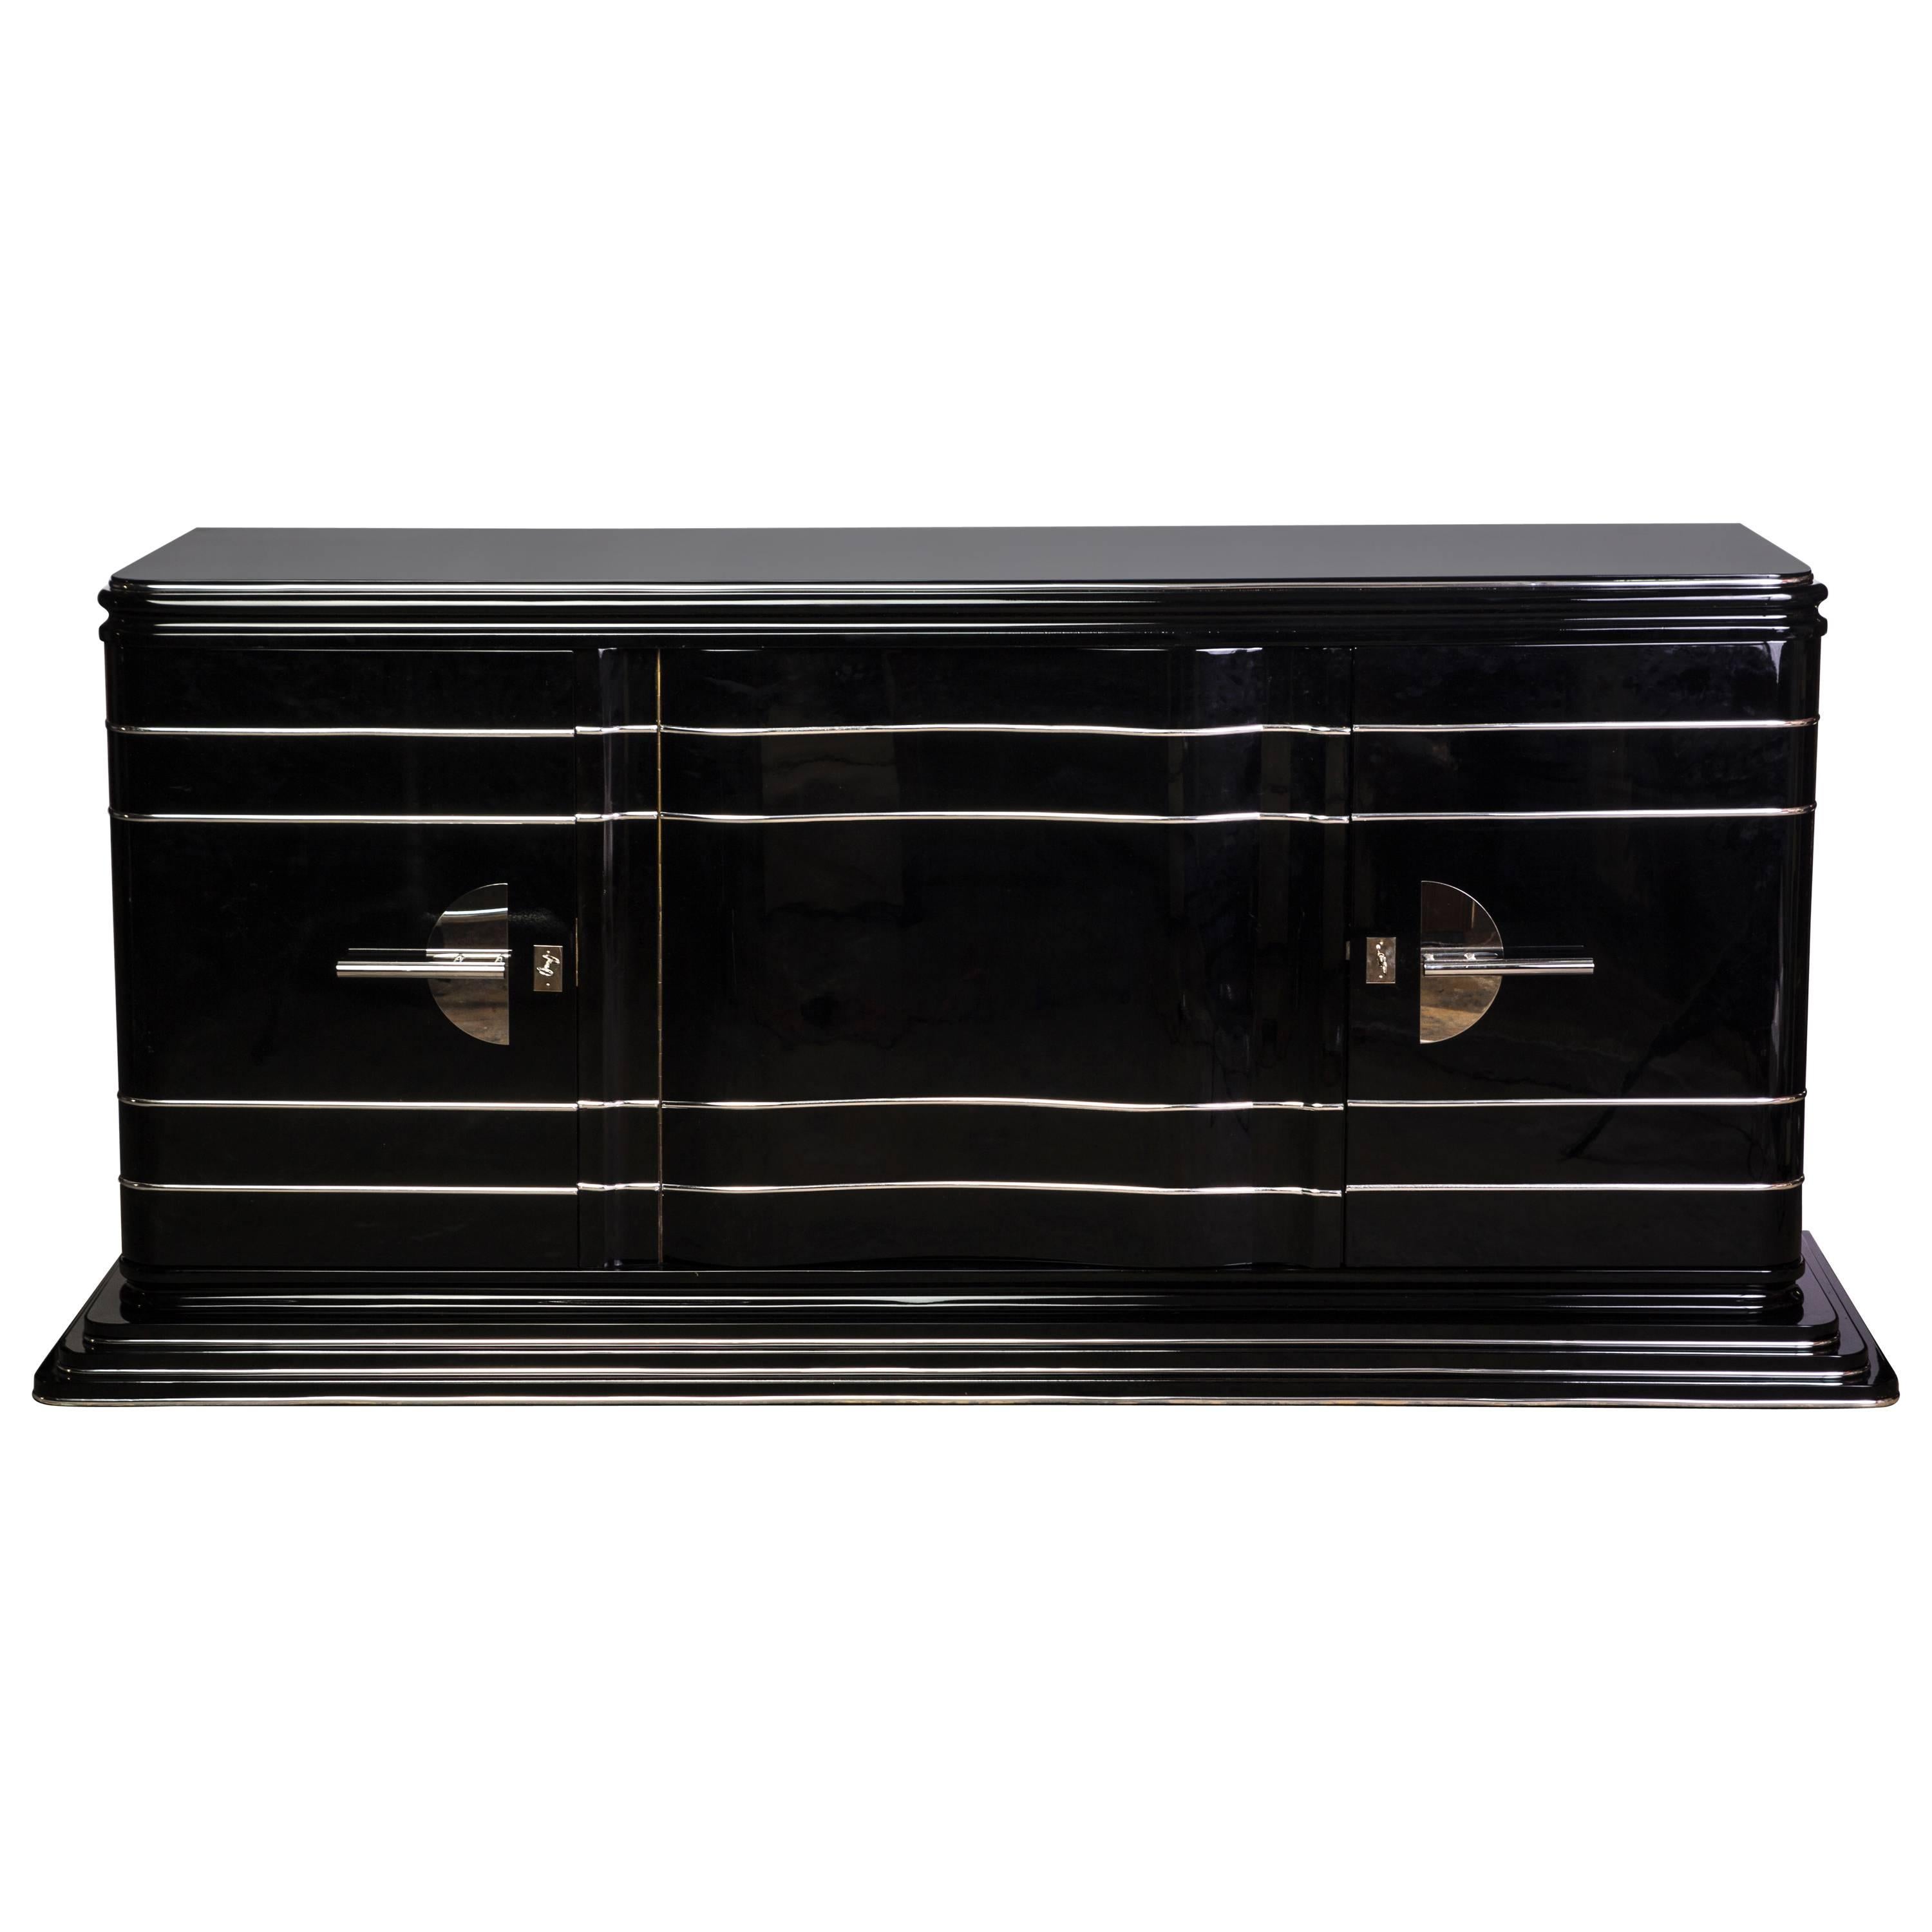 Stunning French Art Deco Sideboard